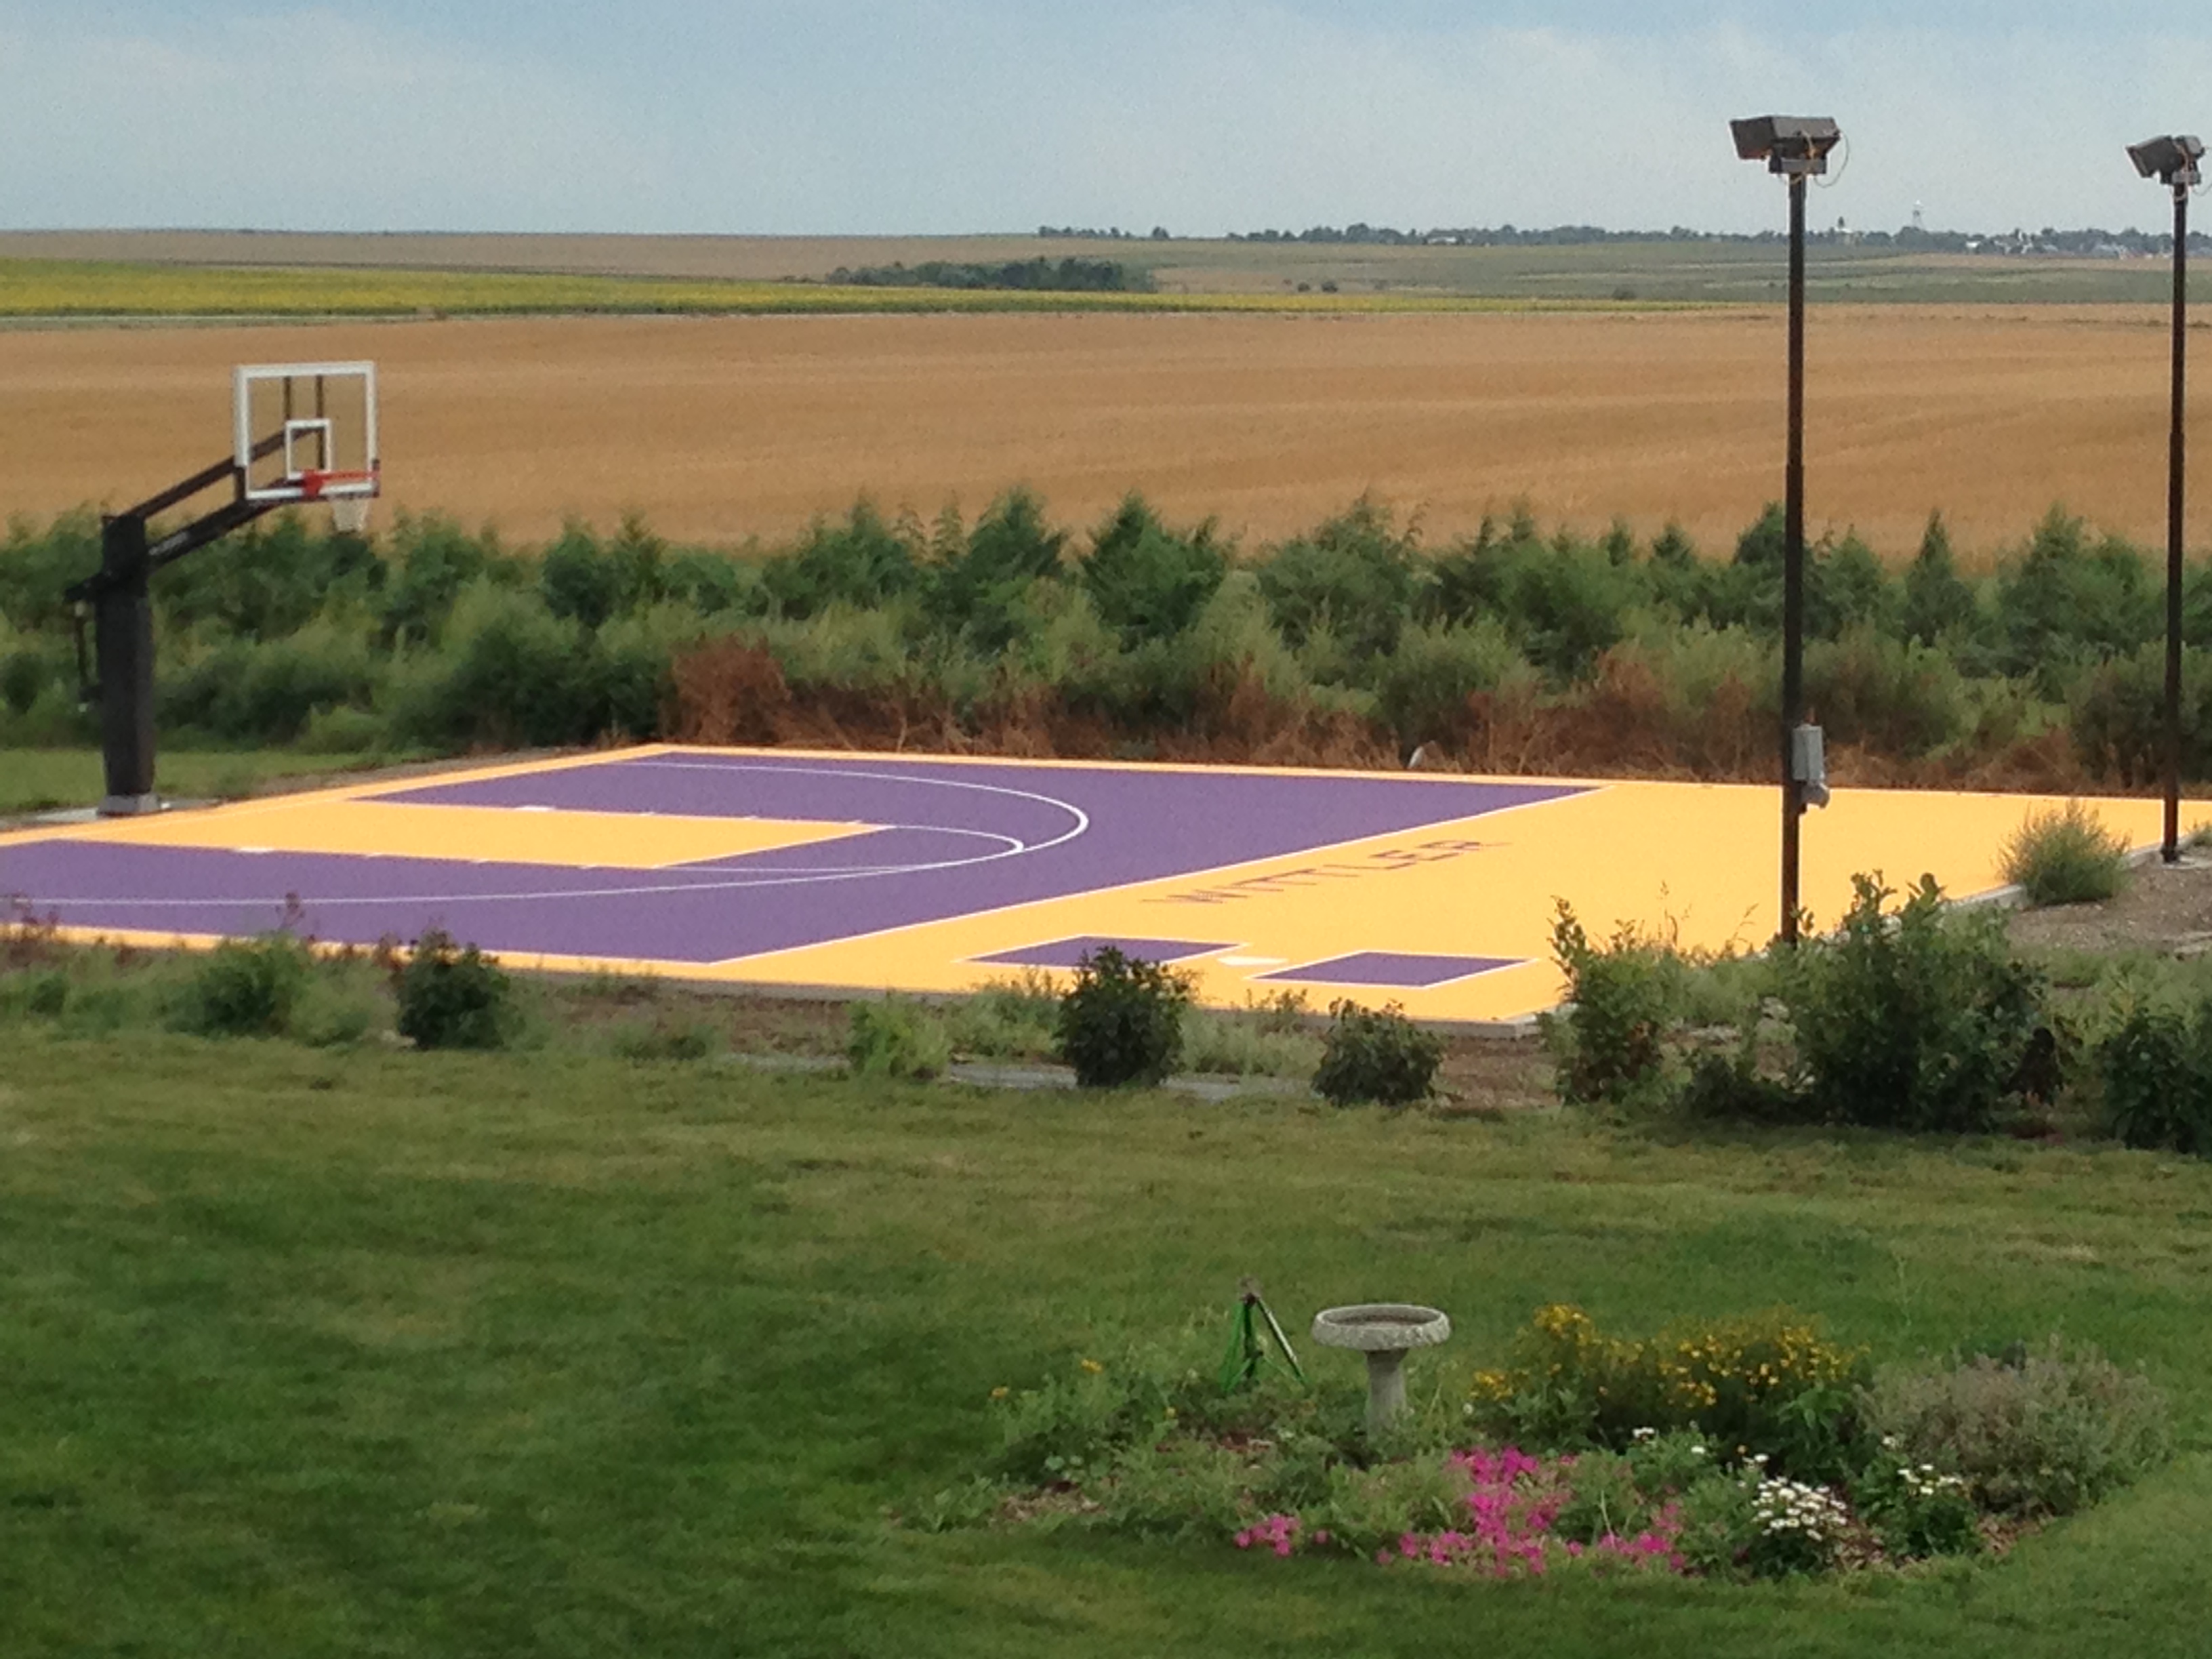 This Pro Dunk Diamond Basketball system stands tall over a custom built court painted gold and purple.